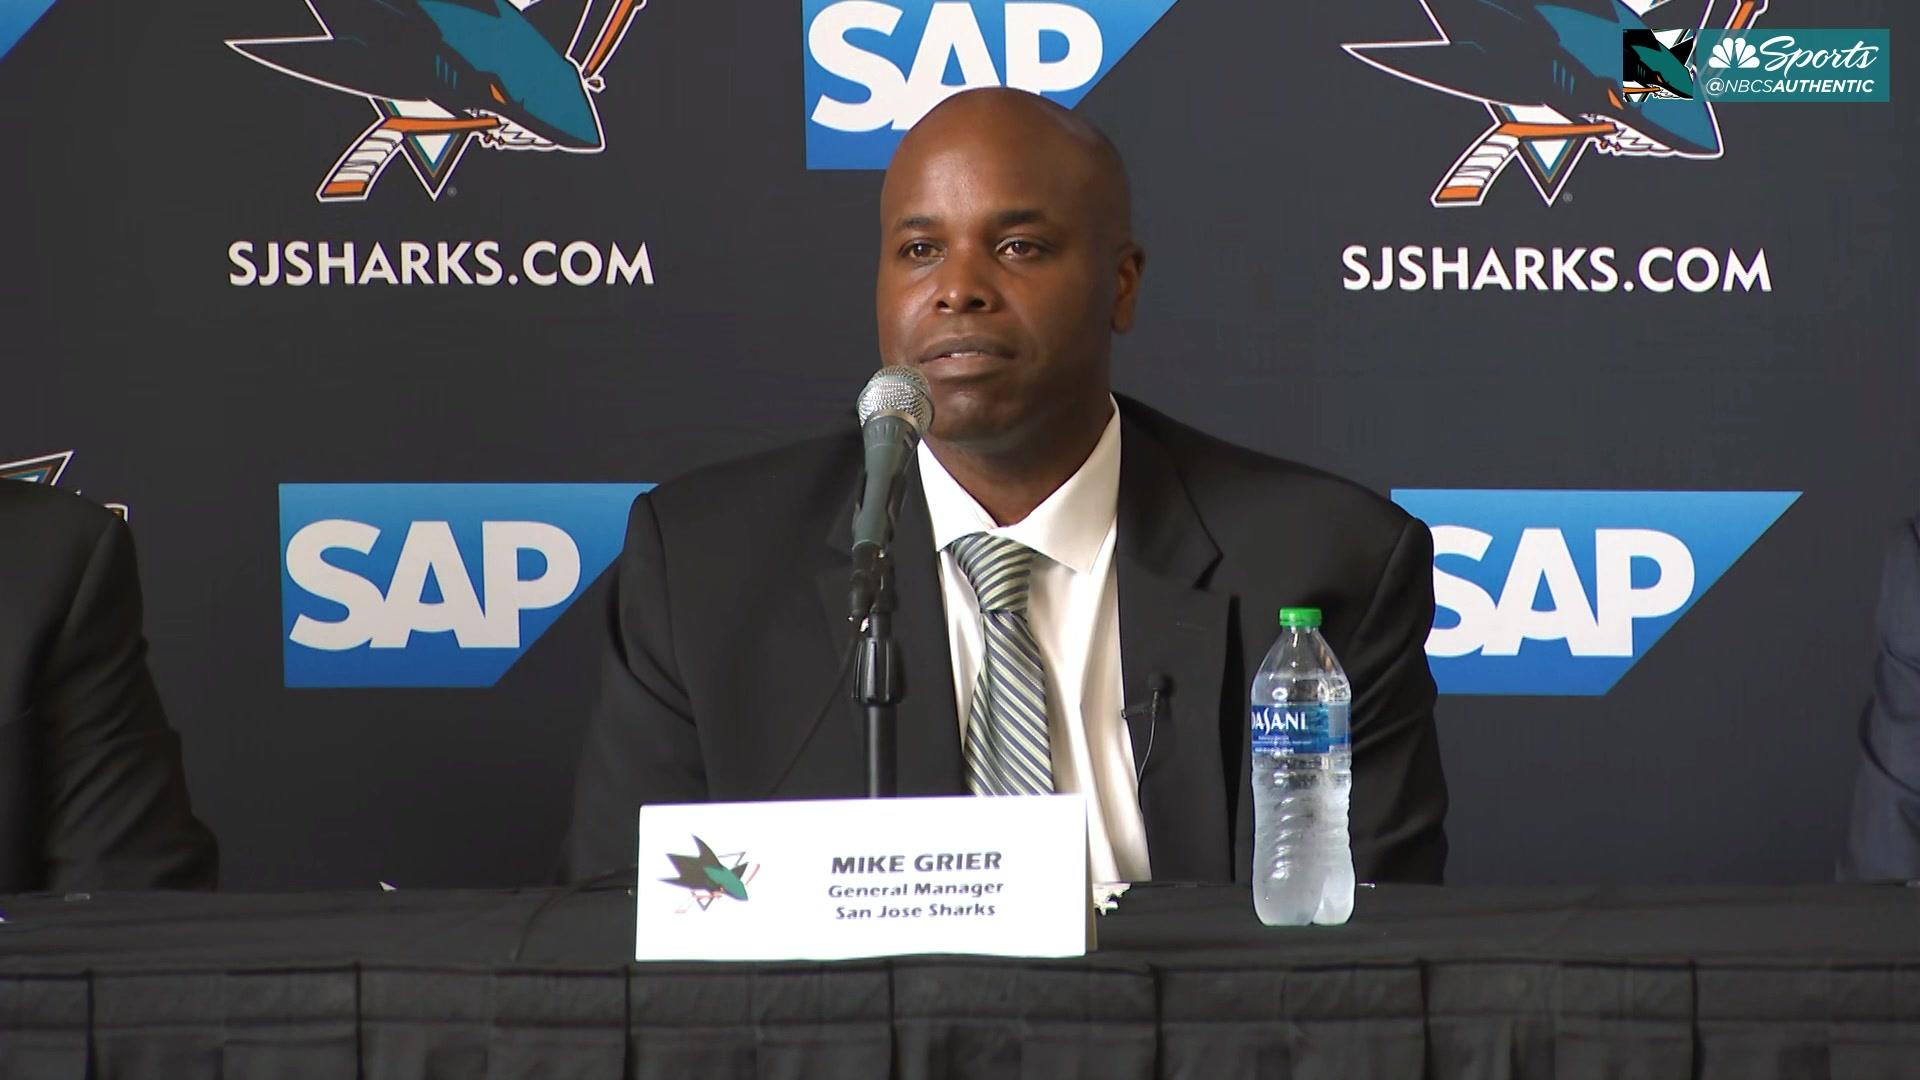 Mike Grier becomes NHL's first Black GM